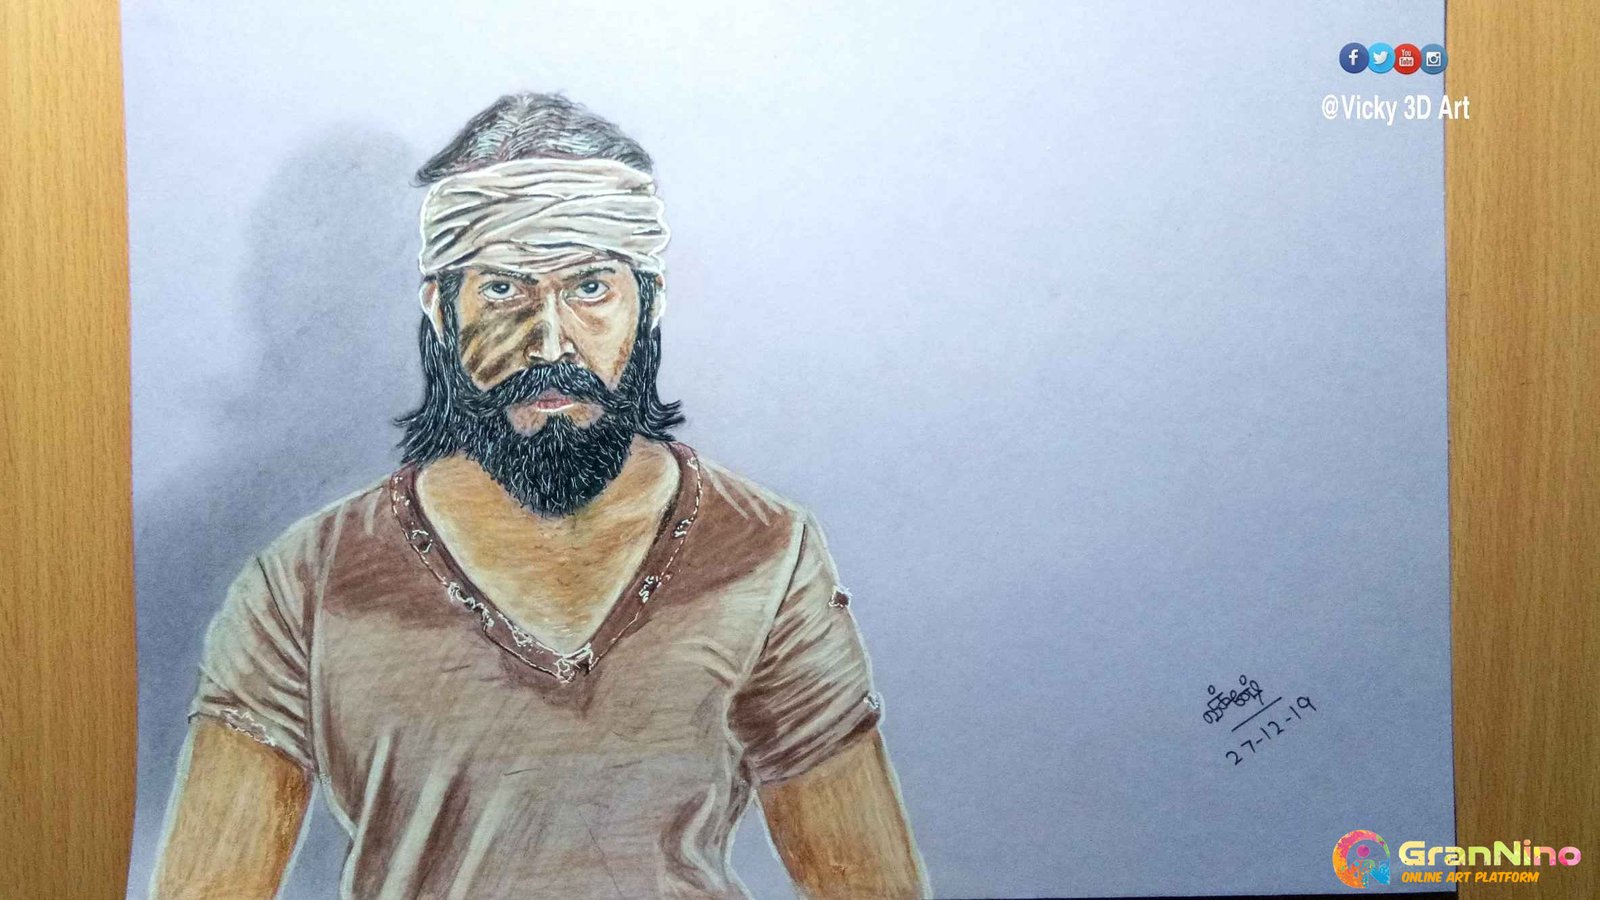 Yash drawingRocky bhaihow to draw yash step by stepKGFKGF CHAPTER 2 drawing kgf rocky bhai  YouTube